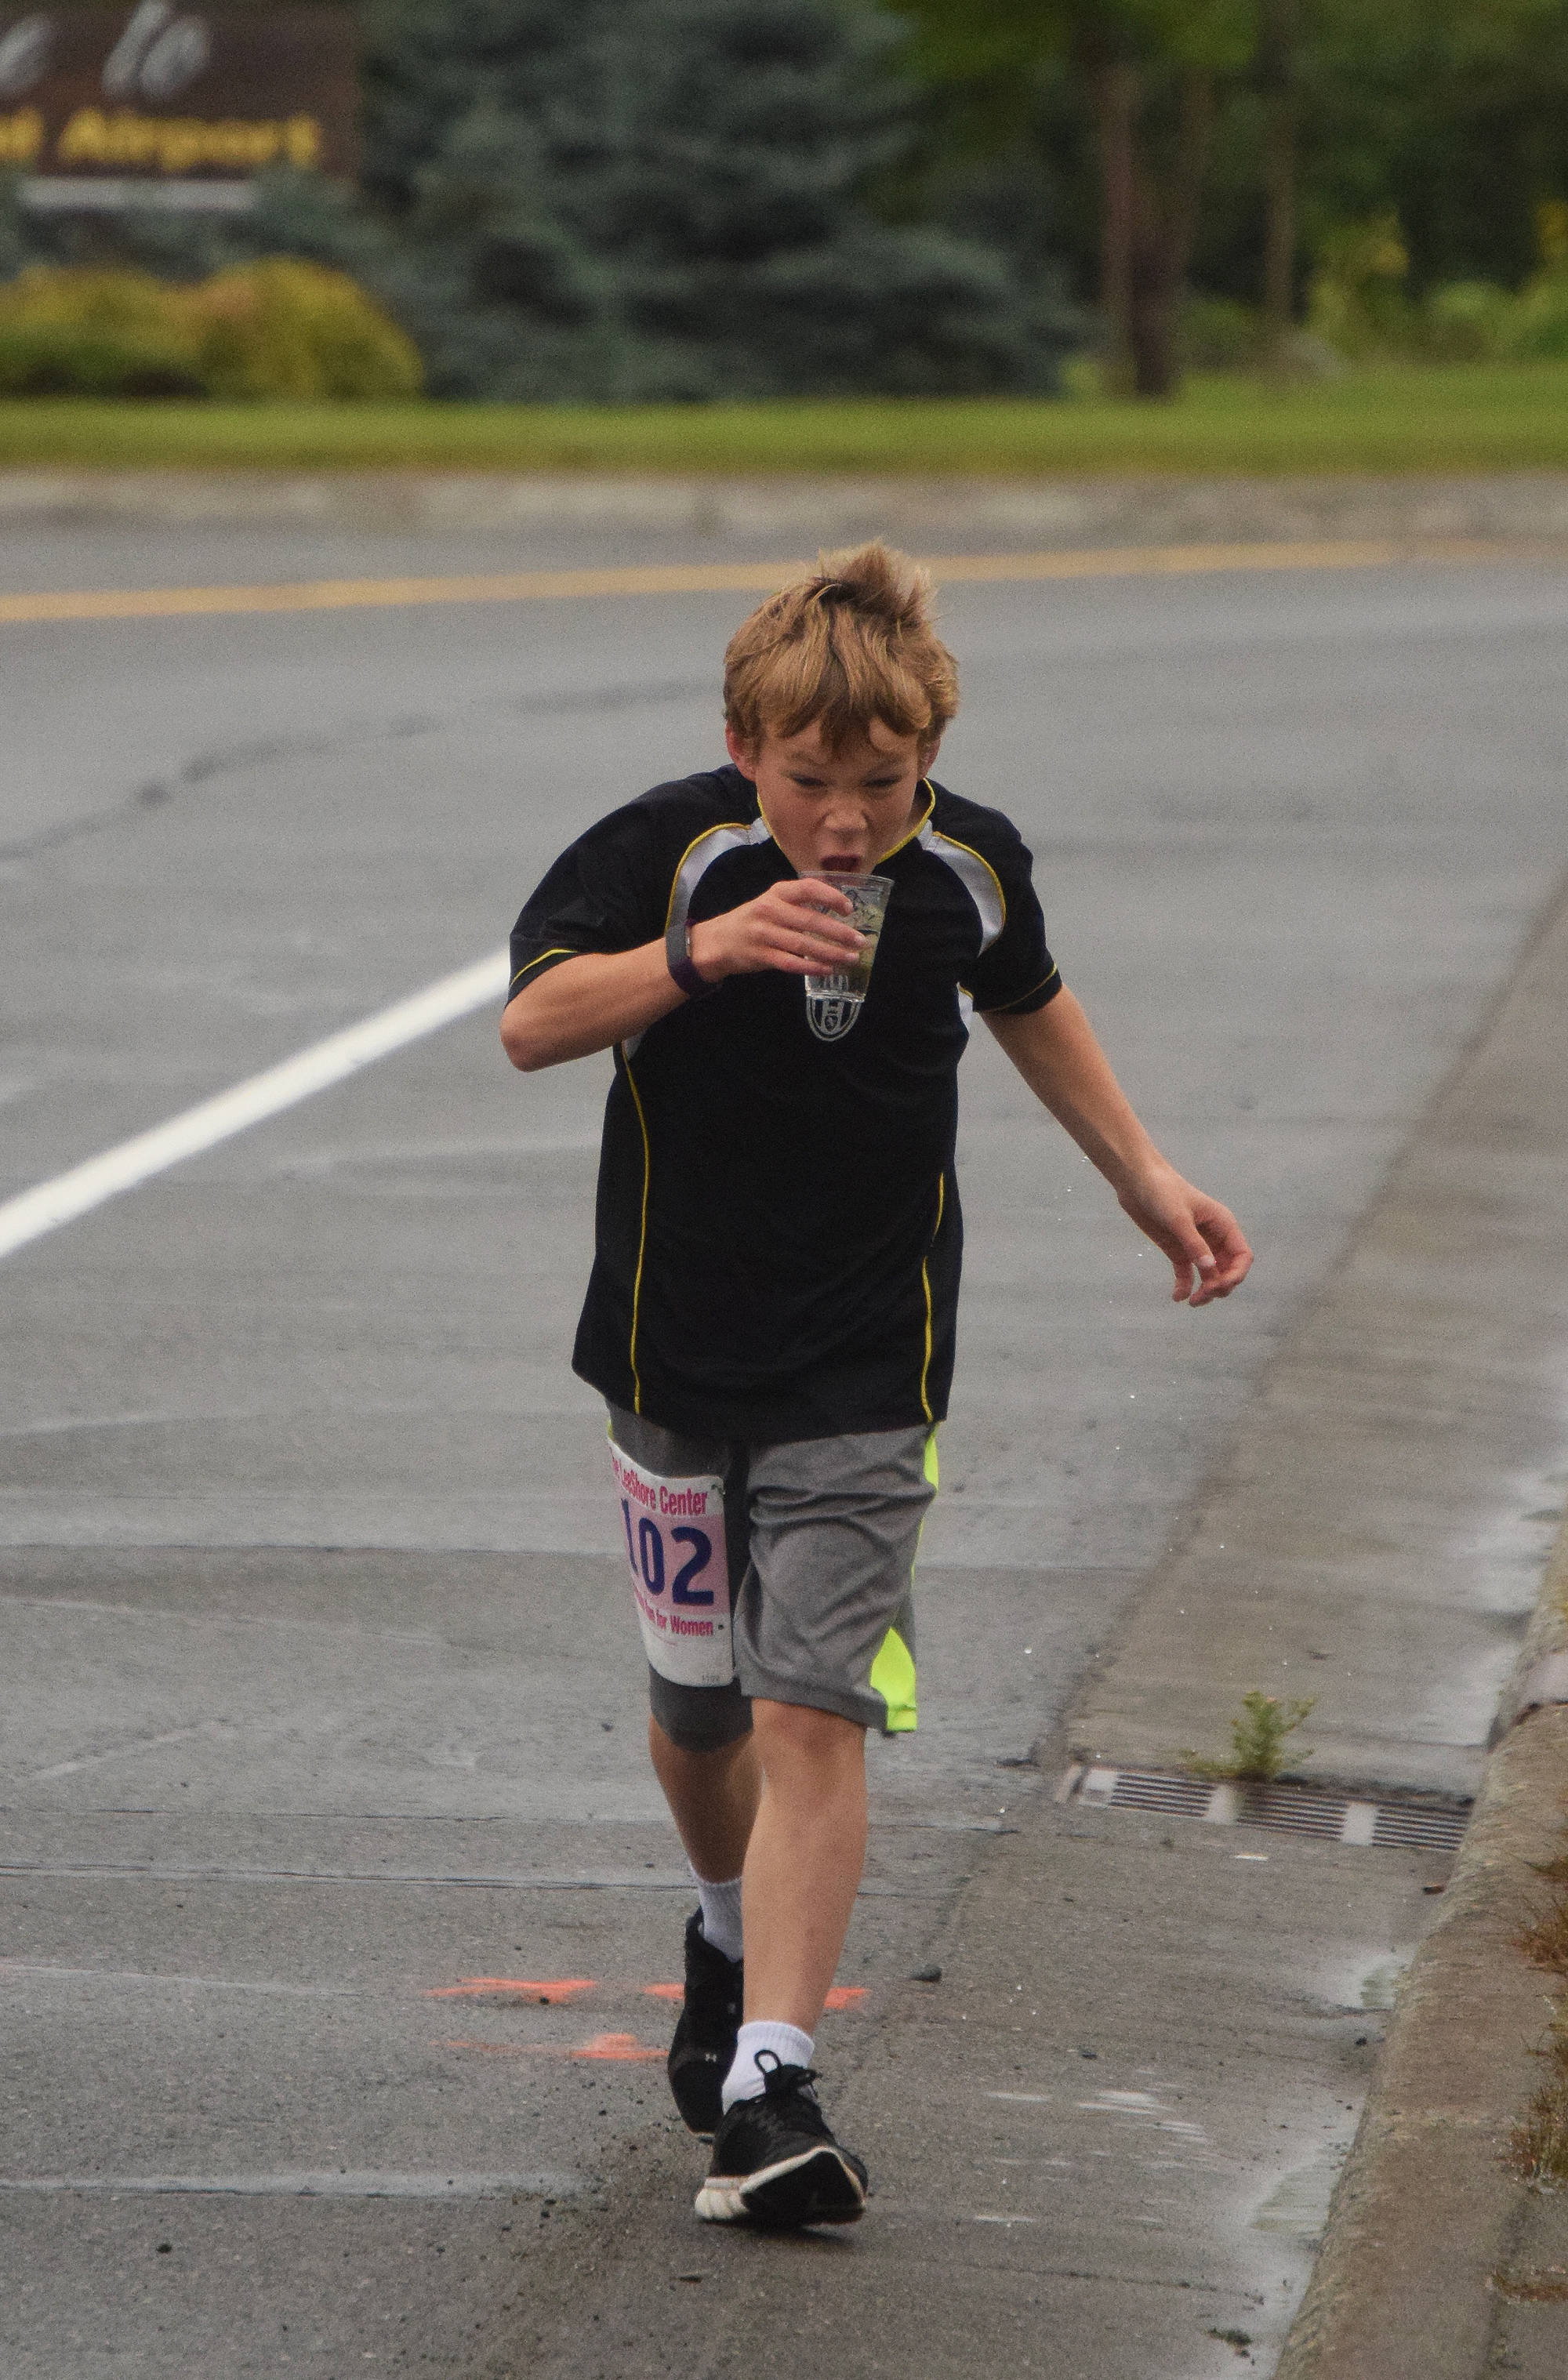 Samuel Anders takes a drink of water early in Saturday morning’s 10K race in the 31st annual LeeShore Center Run for Women in Kenai. (Photo by Joey Klecka/Peninsula Clarion)